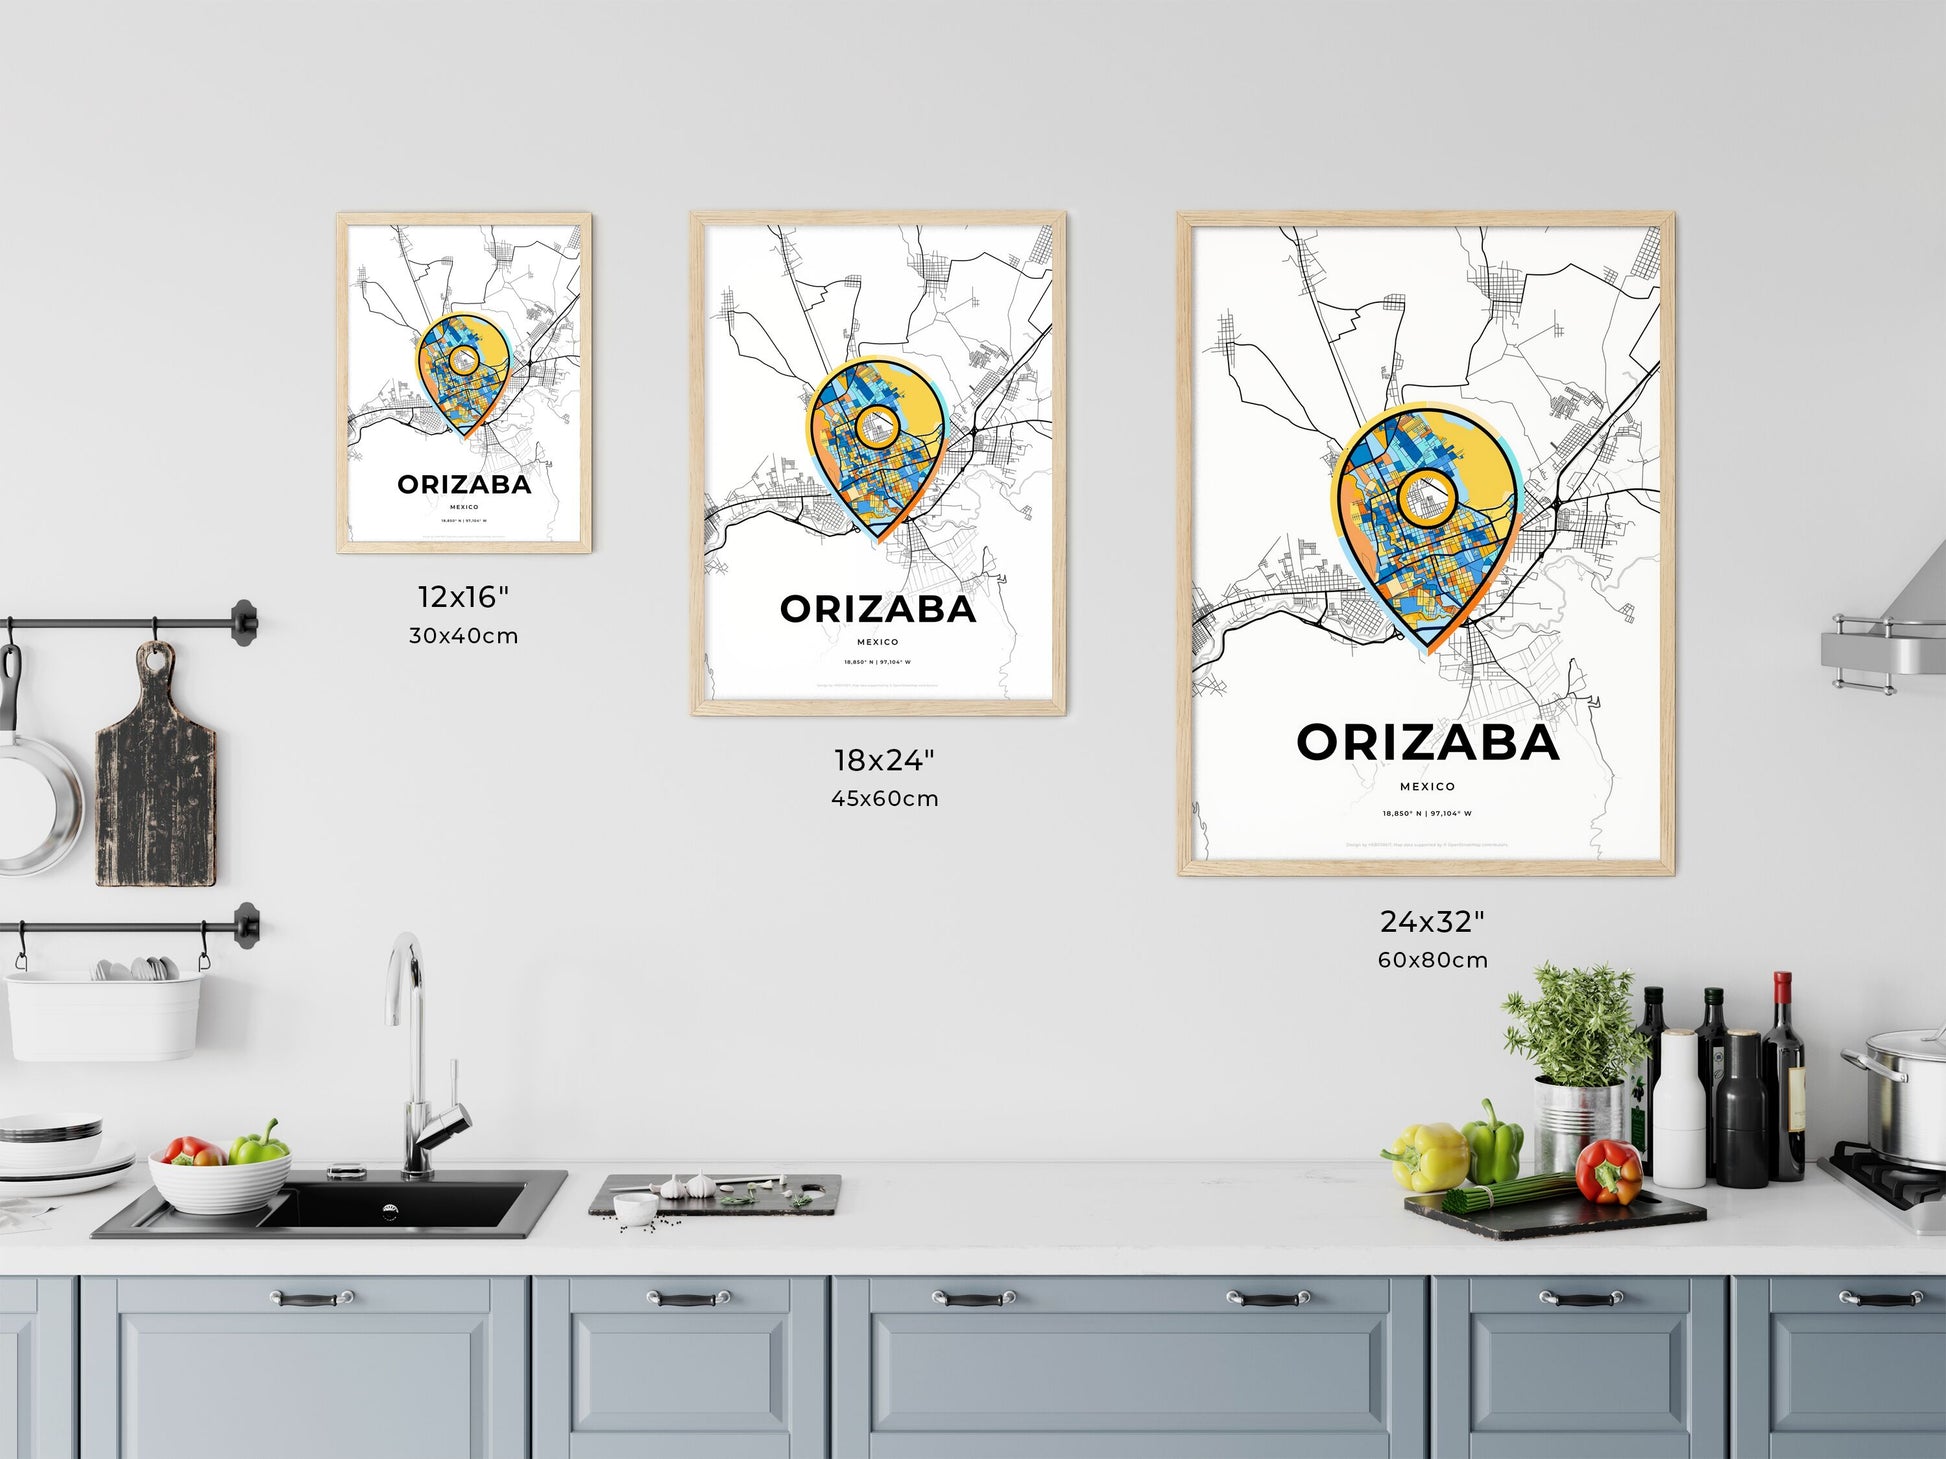 ORIZABA MEXICO minimal art map with a colorful icon. Where it all began, Couple map gift.